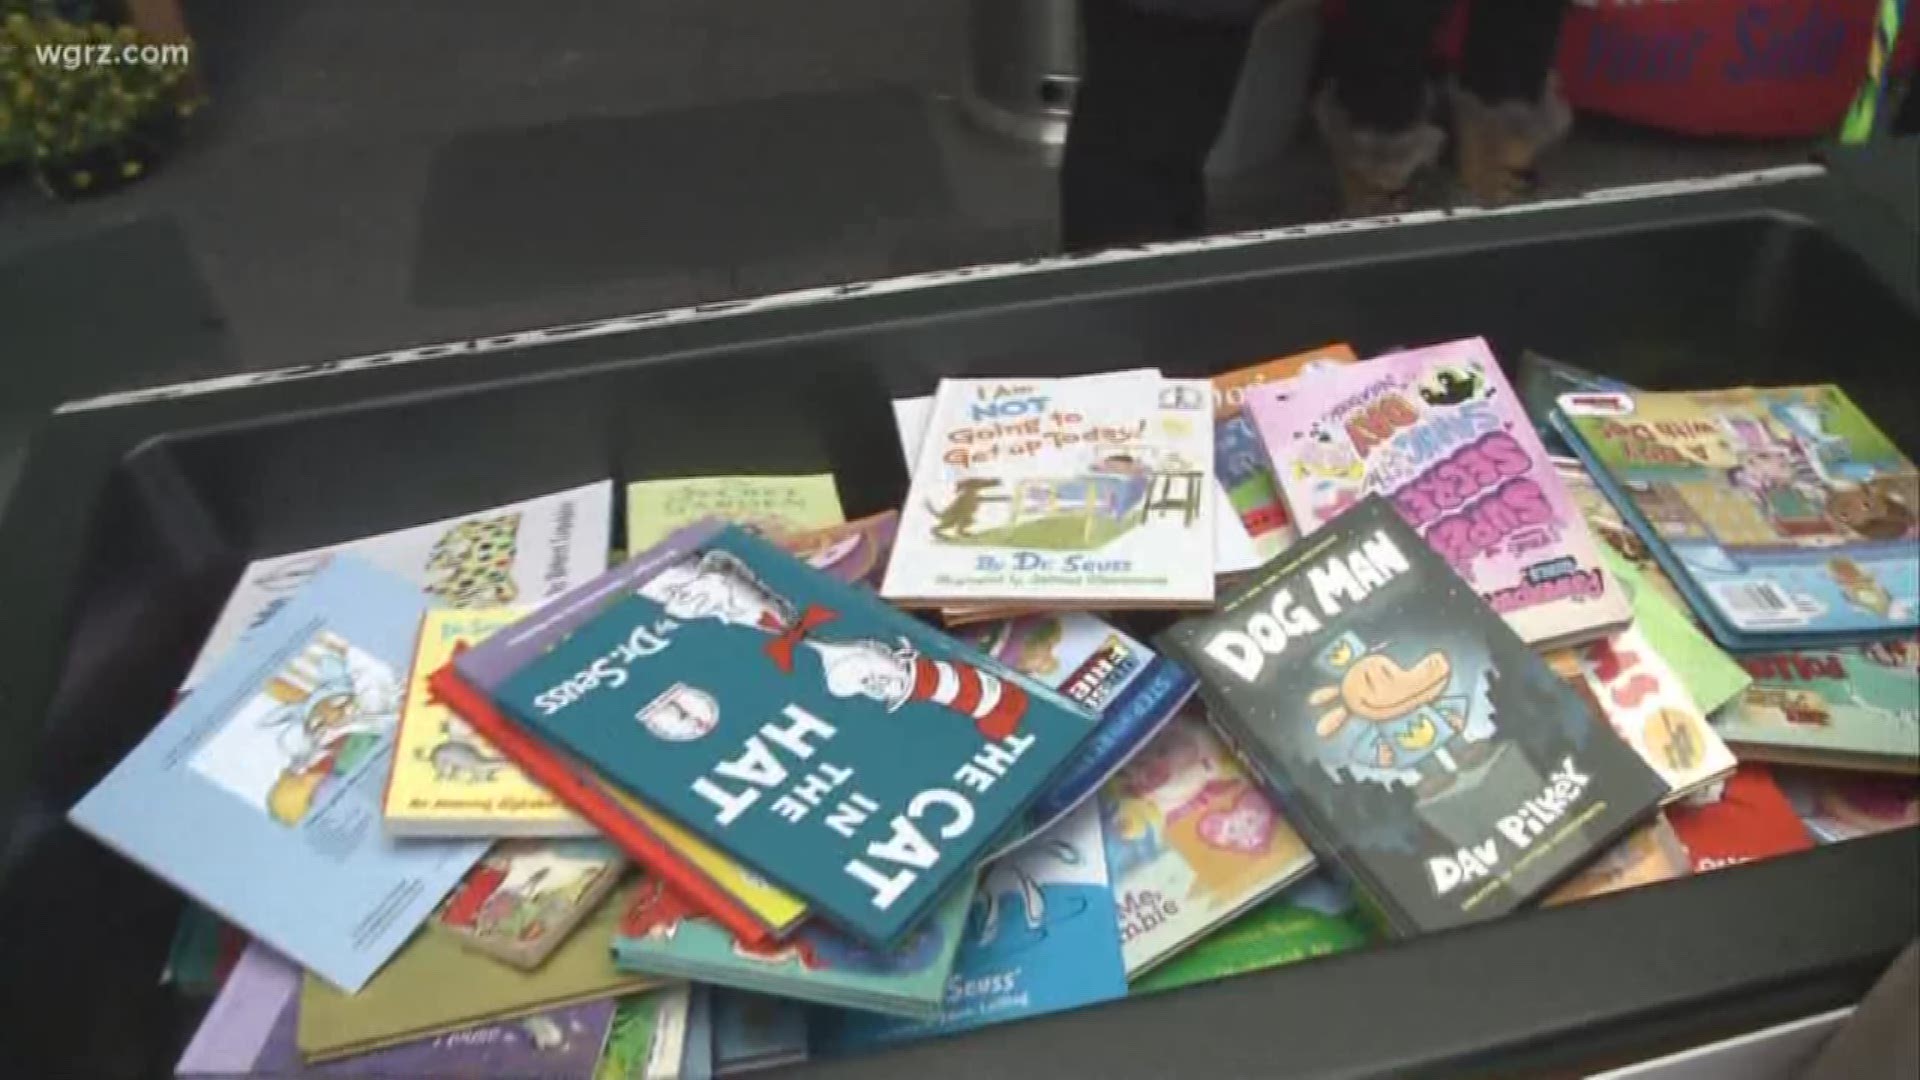 Hundreds of books have been donated to the Books for Kids book drive